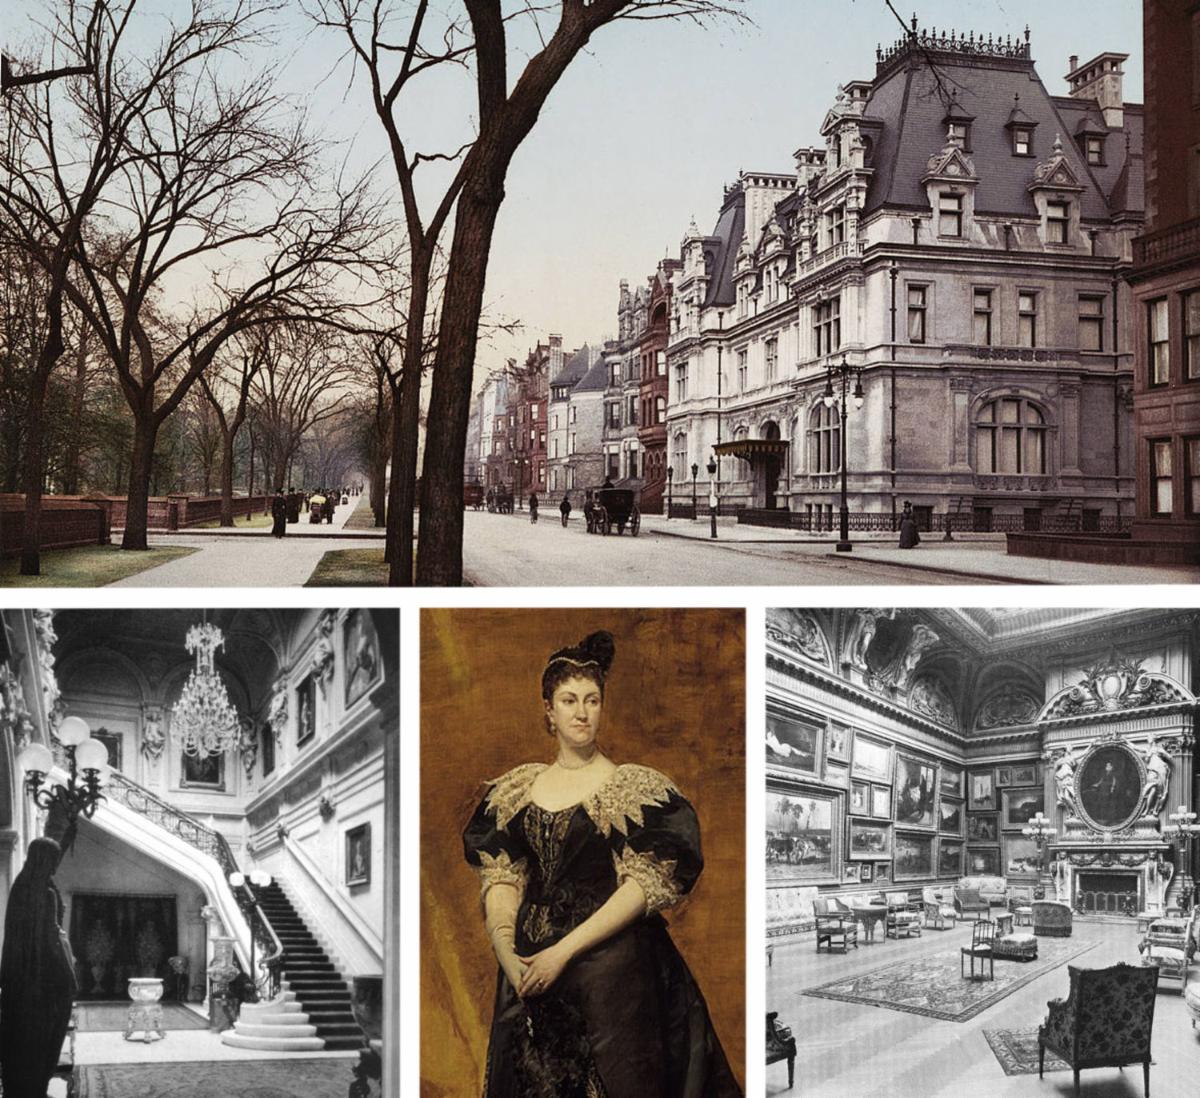 Mansions of the Gilded Age